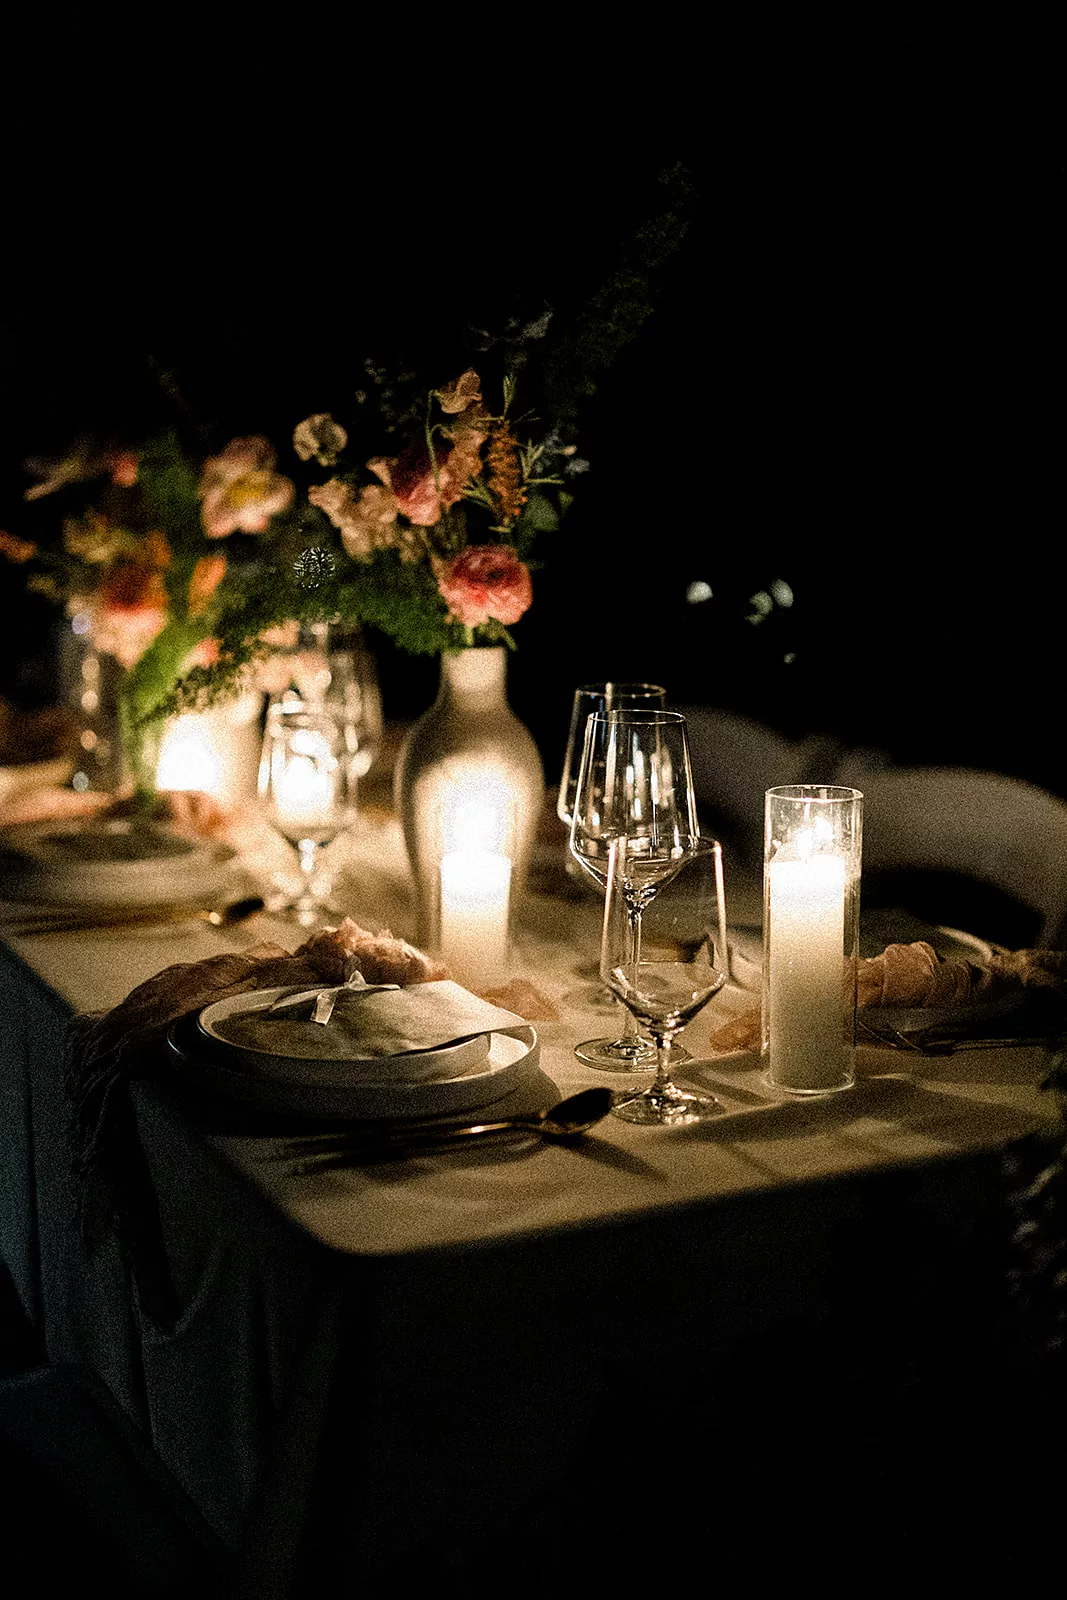 Details of a wedding reception table set up at night with candles